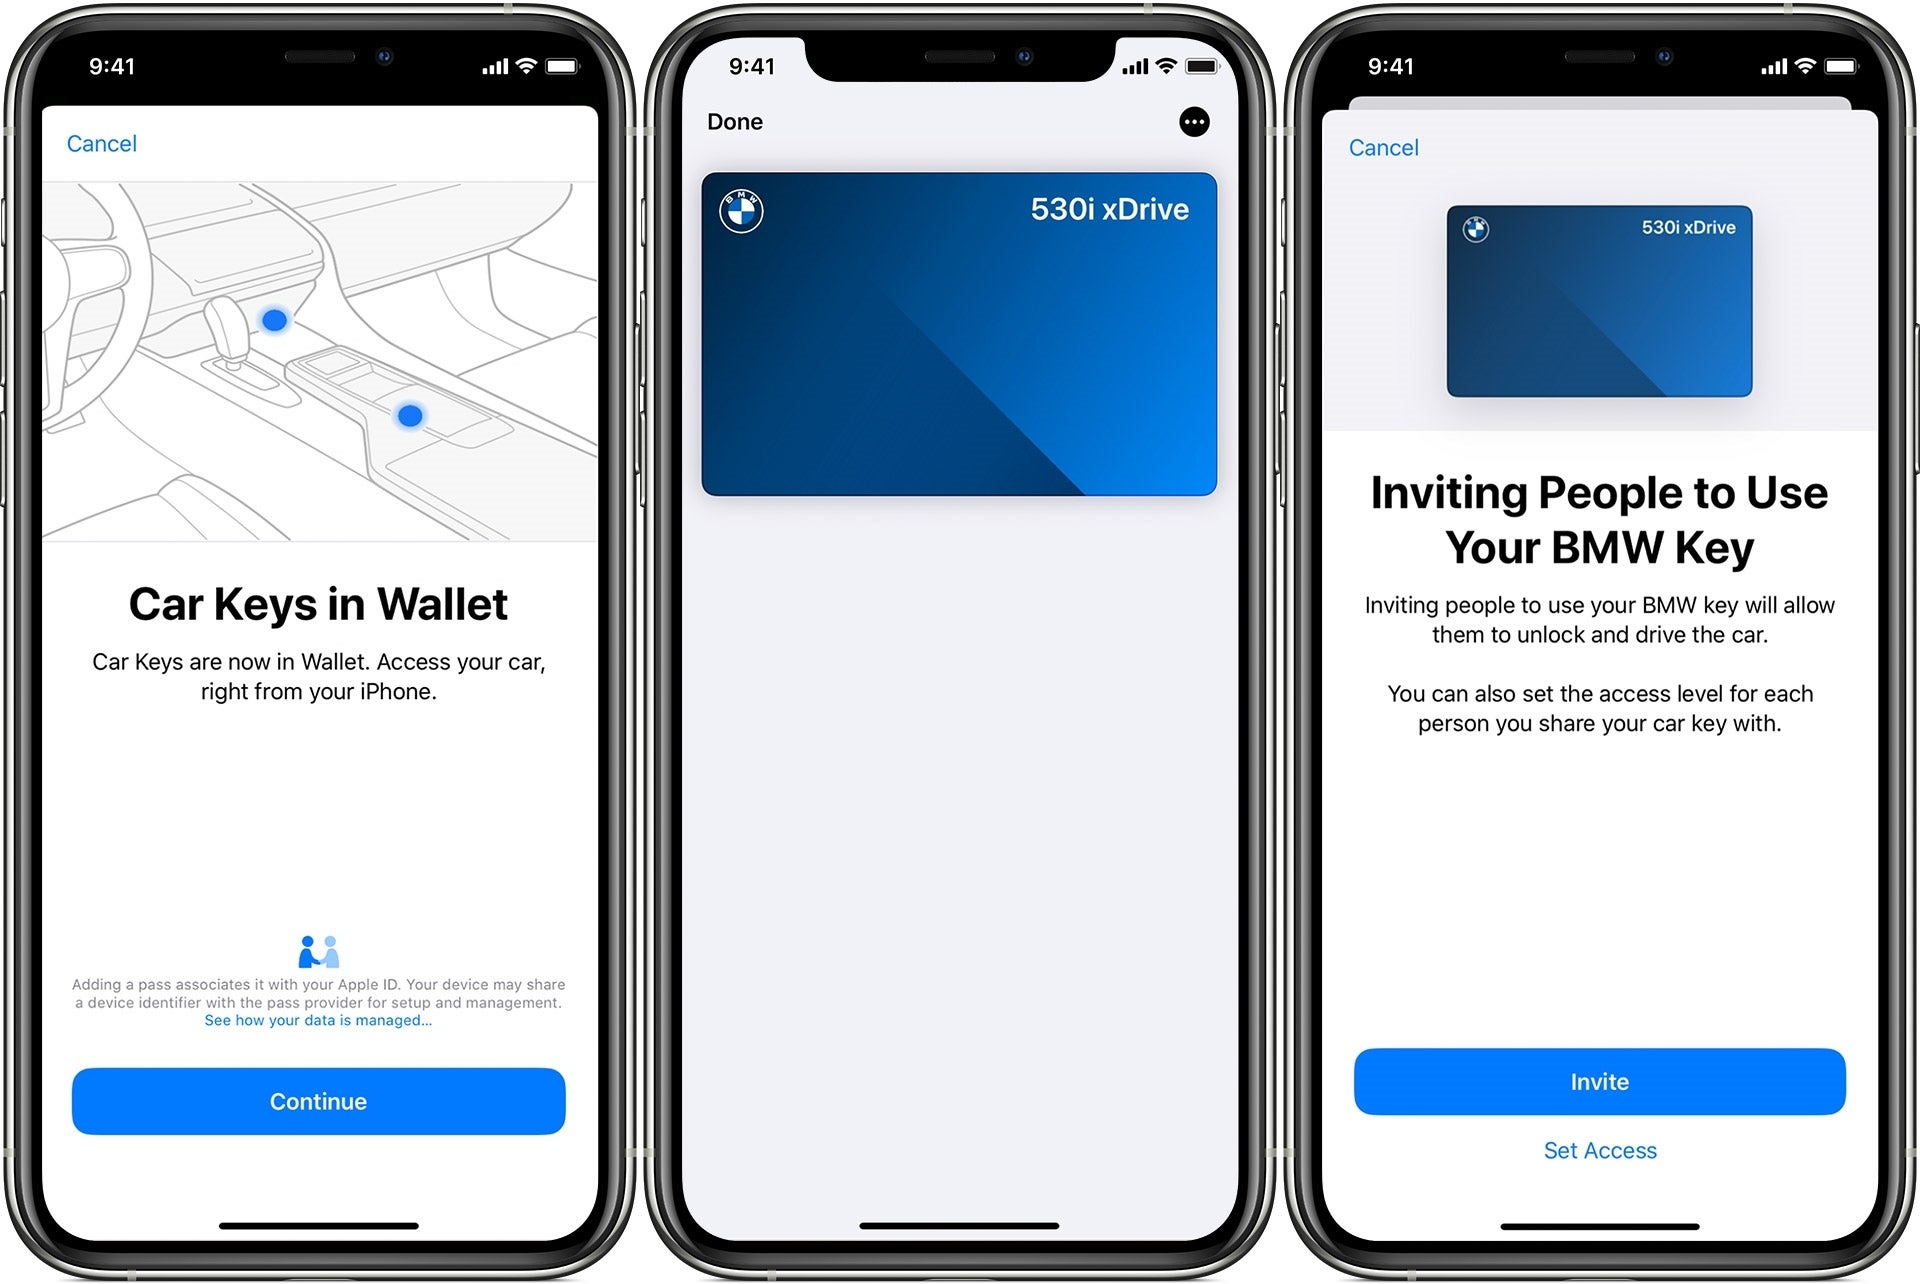 You can start your BMW with Apple Wallet and share access to other iPhone users - Apple Wallet will support IDs and door locks with iOS 15